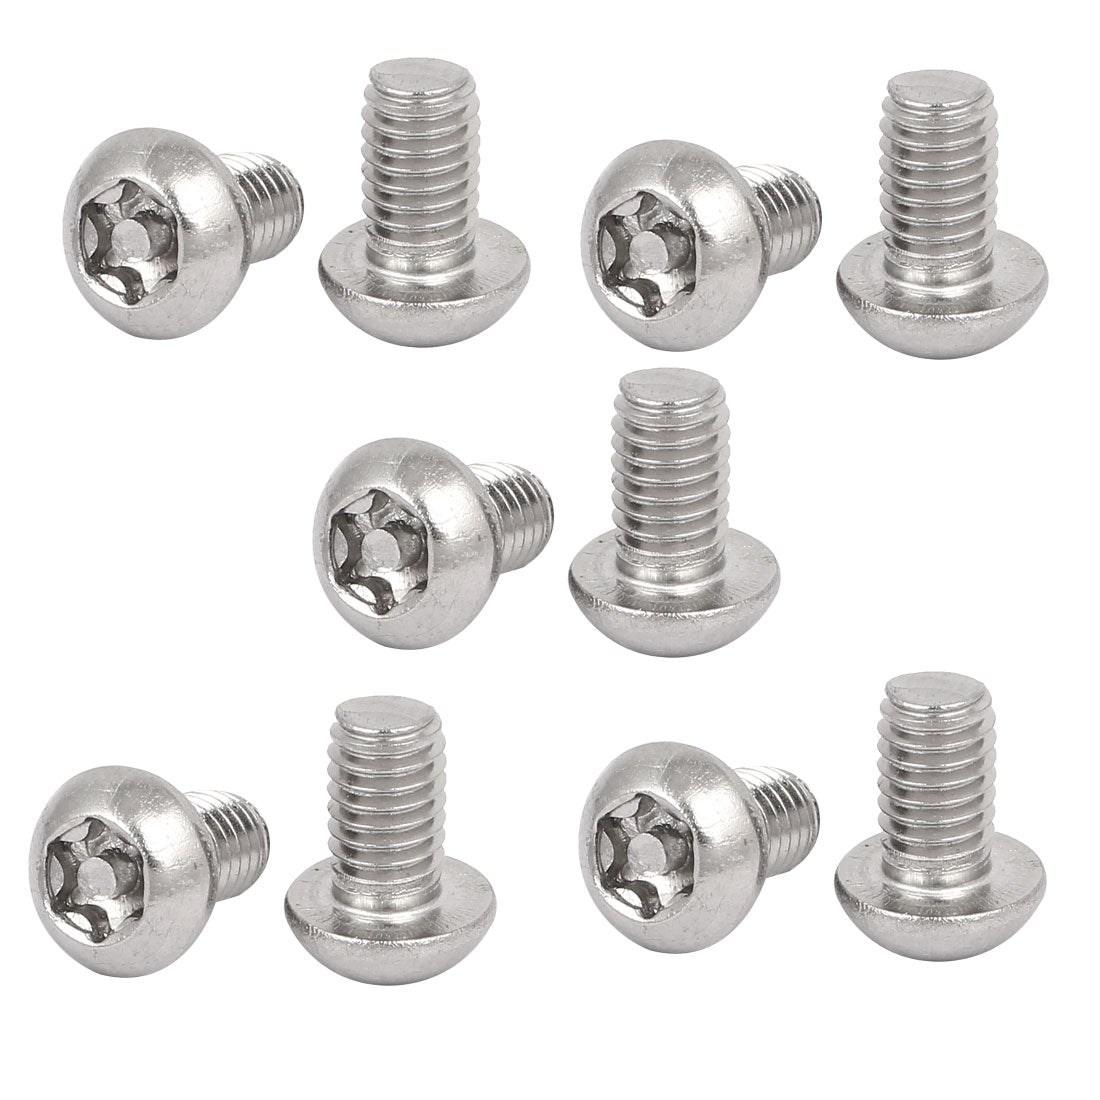 uxcell Uxcell M6x10mm 304 Stainless Steel Button Head Torx Security Tamper Proof Screws 10pcs